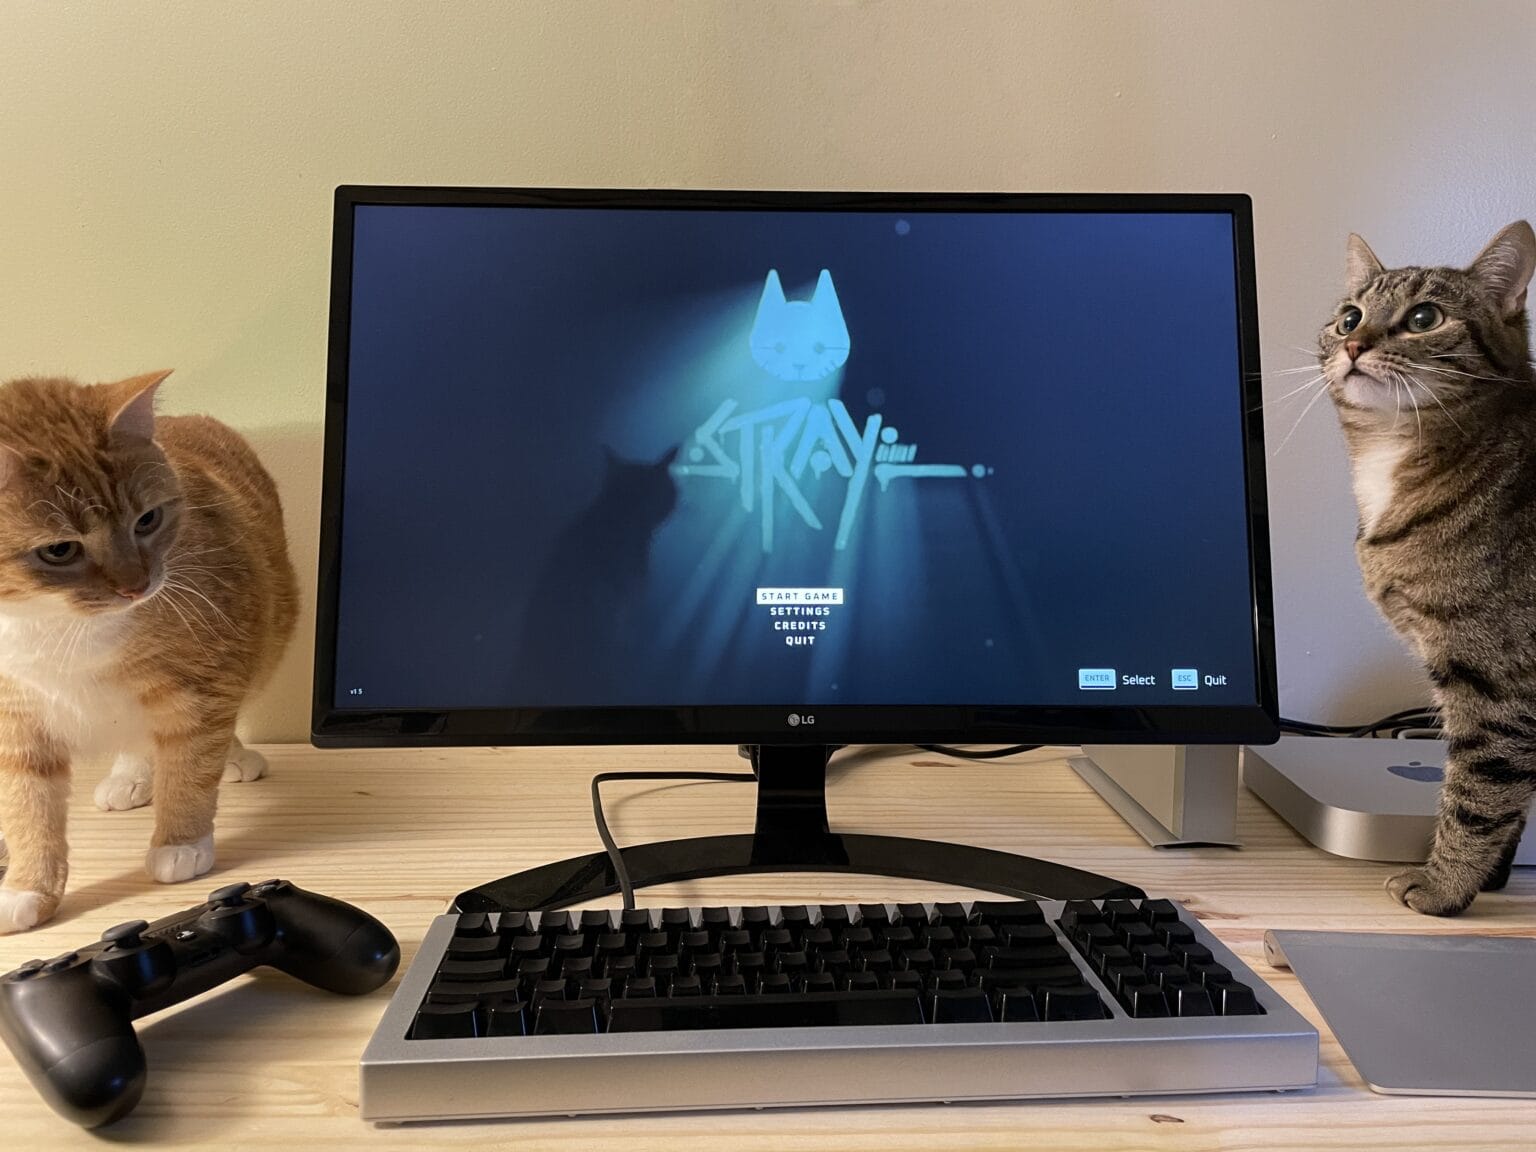 Photo of the Stray title screen on a Mac, with two cats sitting on the desk nearby